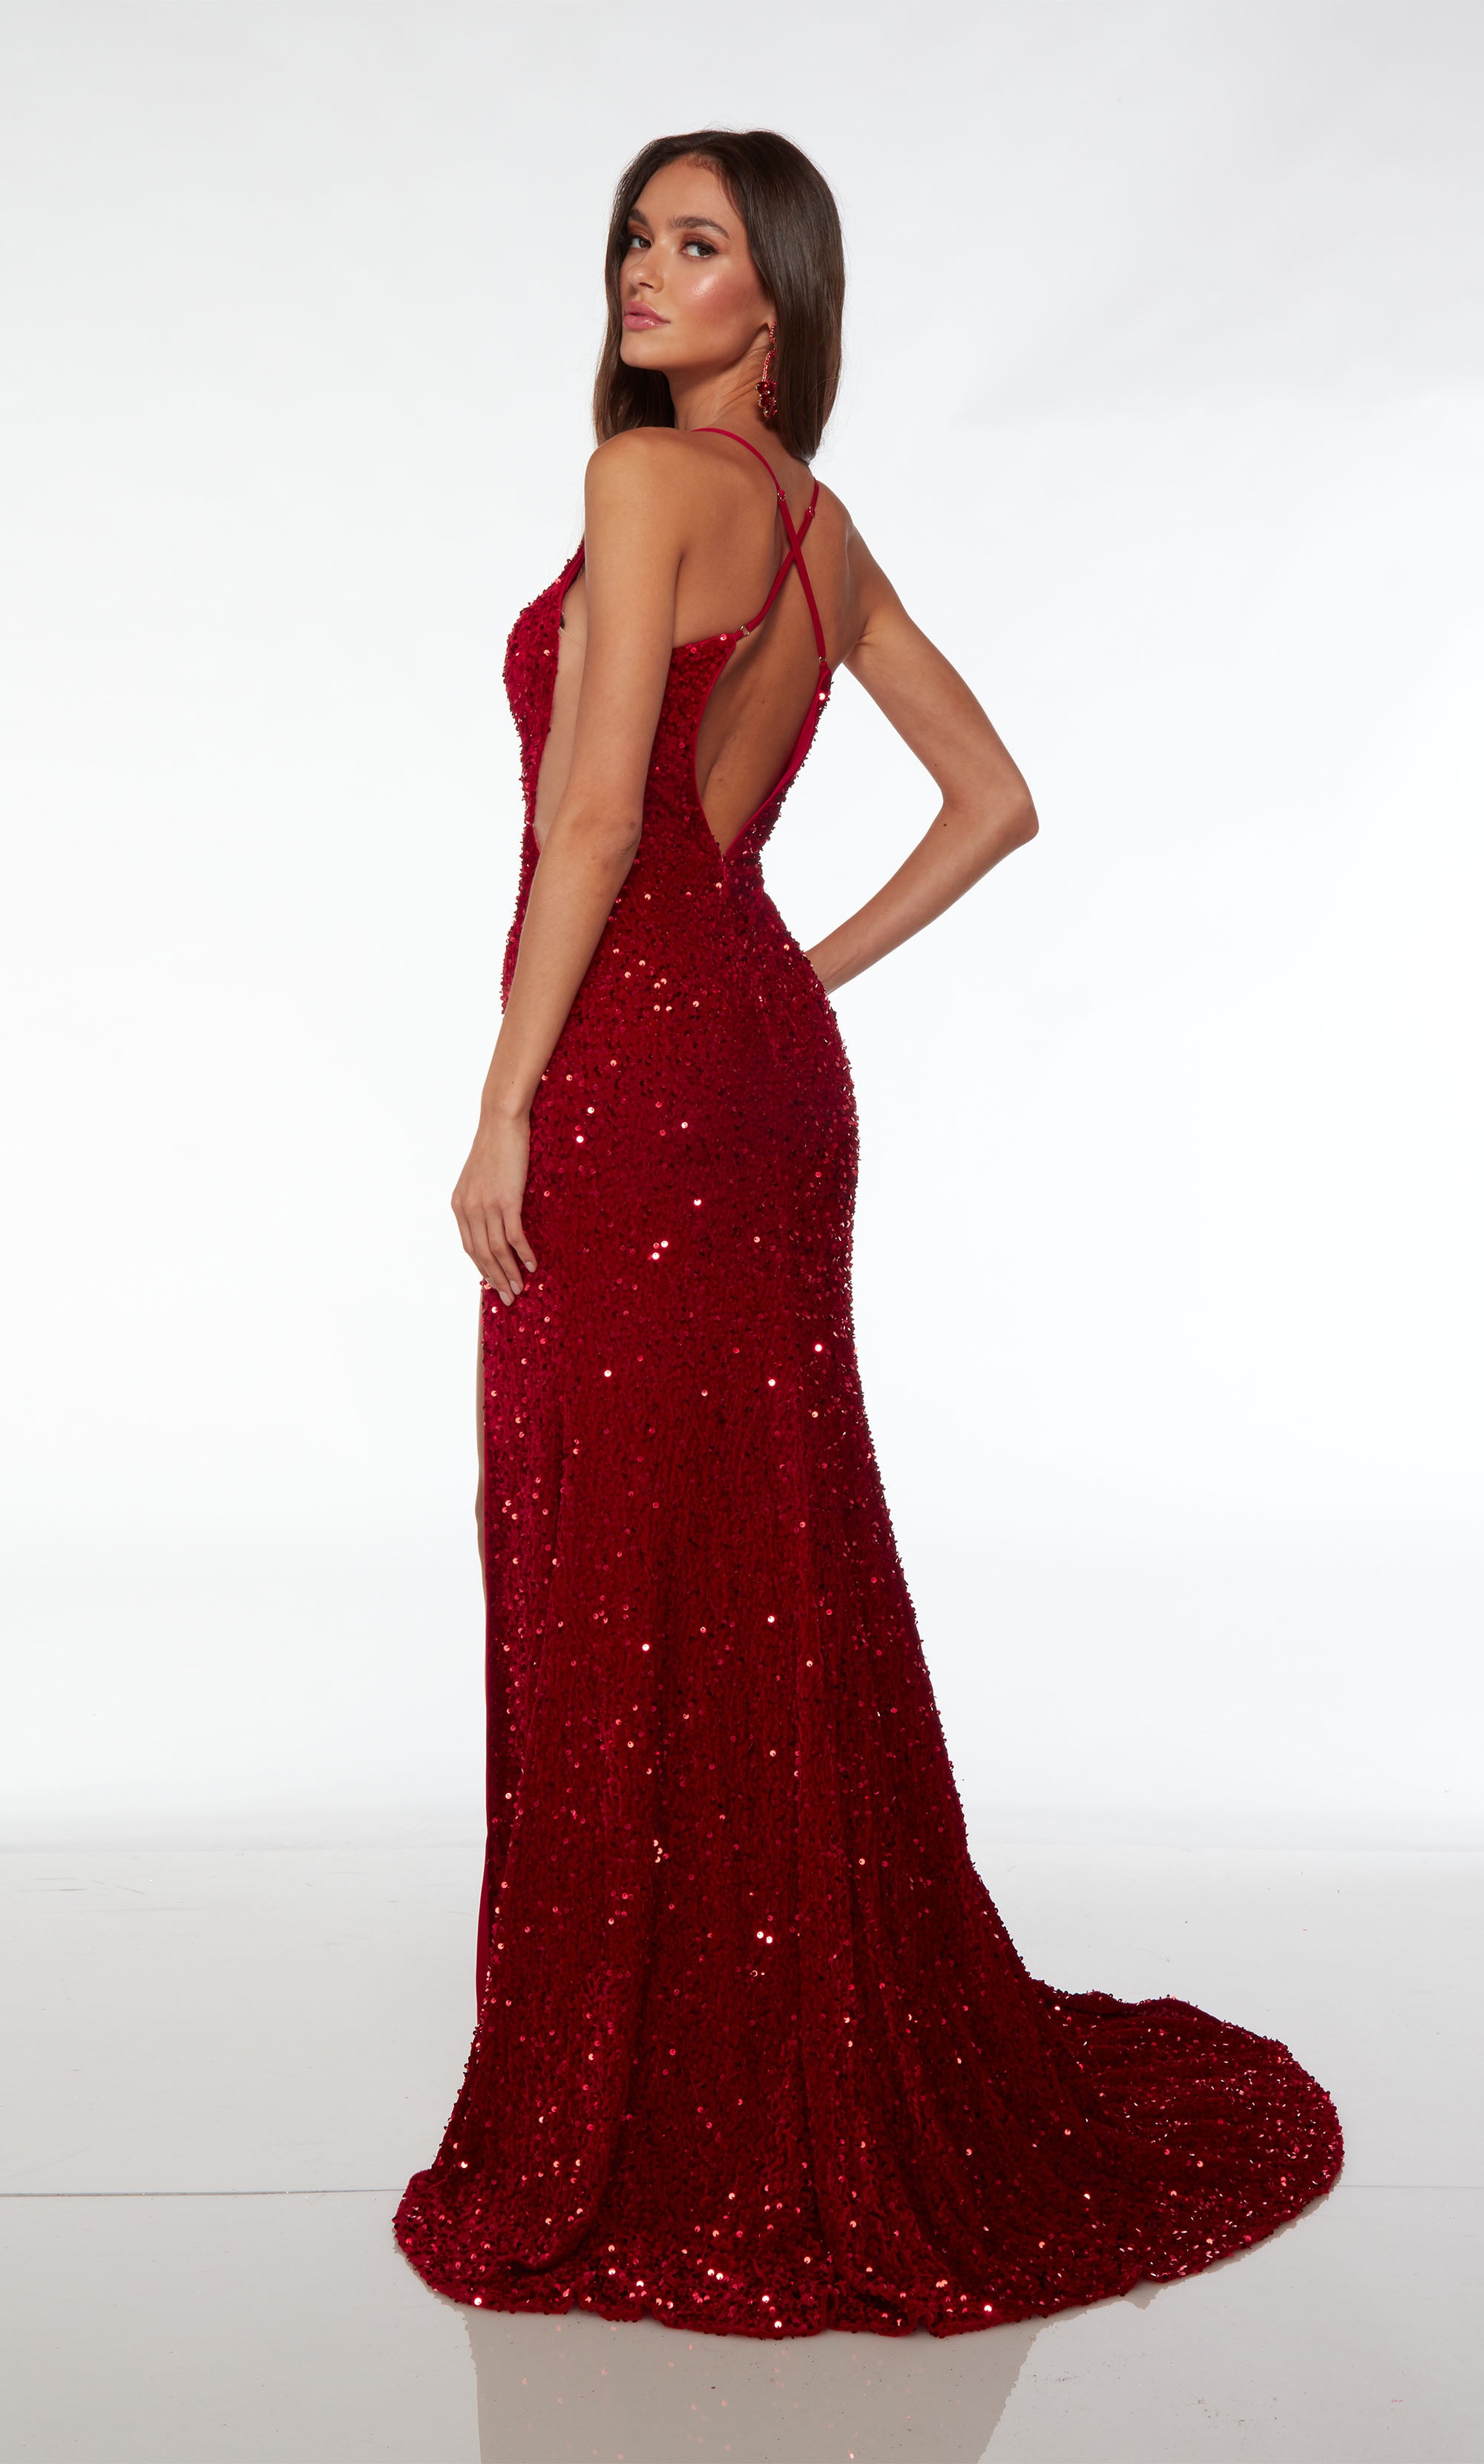 Plunging sequin dress: High slit, illusion side cutouts, crisscross keyhole back, and an gorgeous train for an stunning and captivating ensemble.